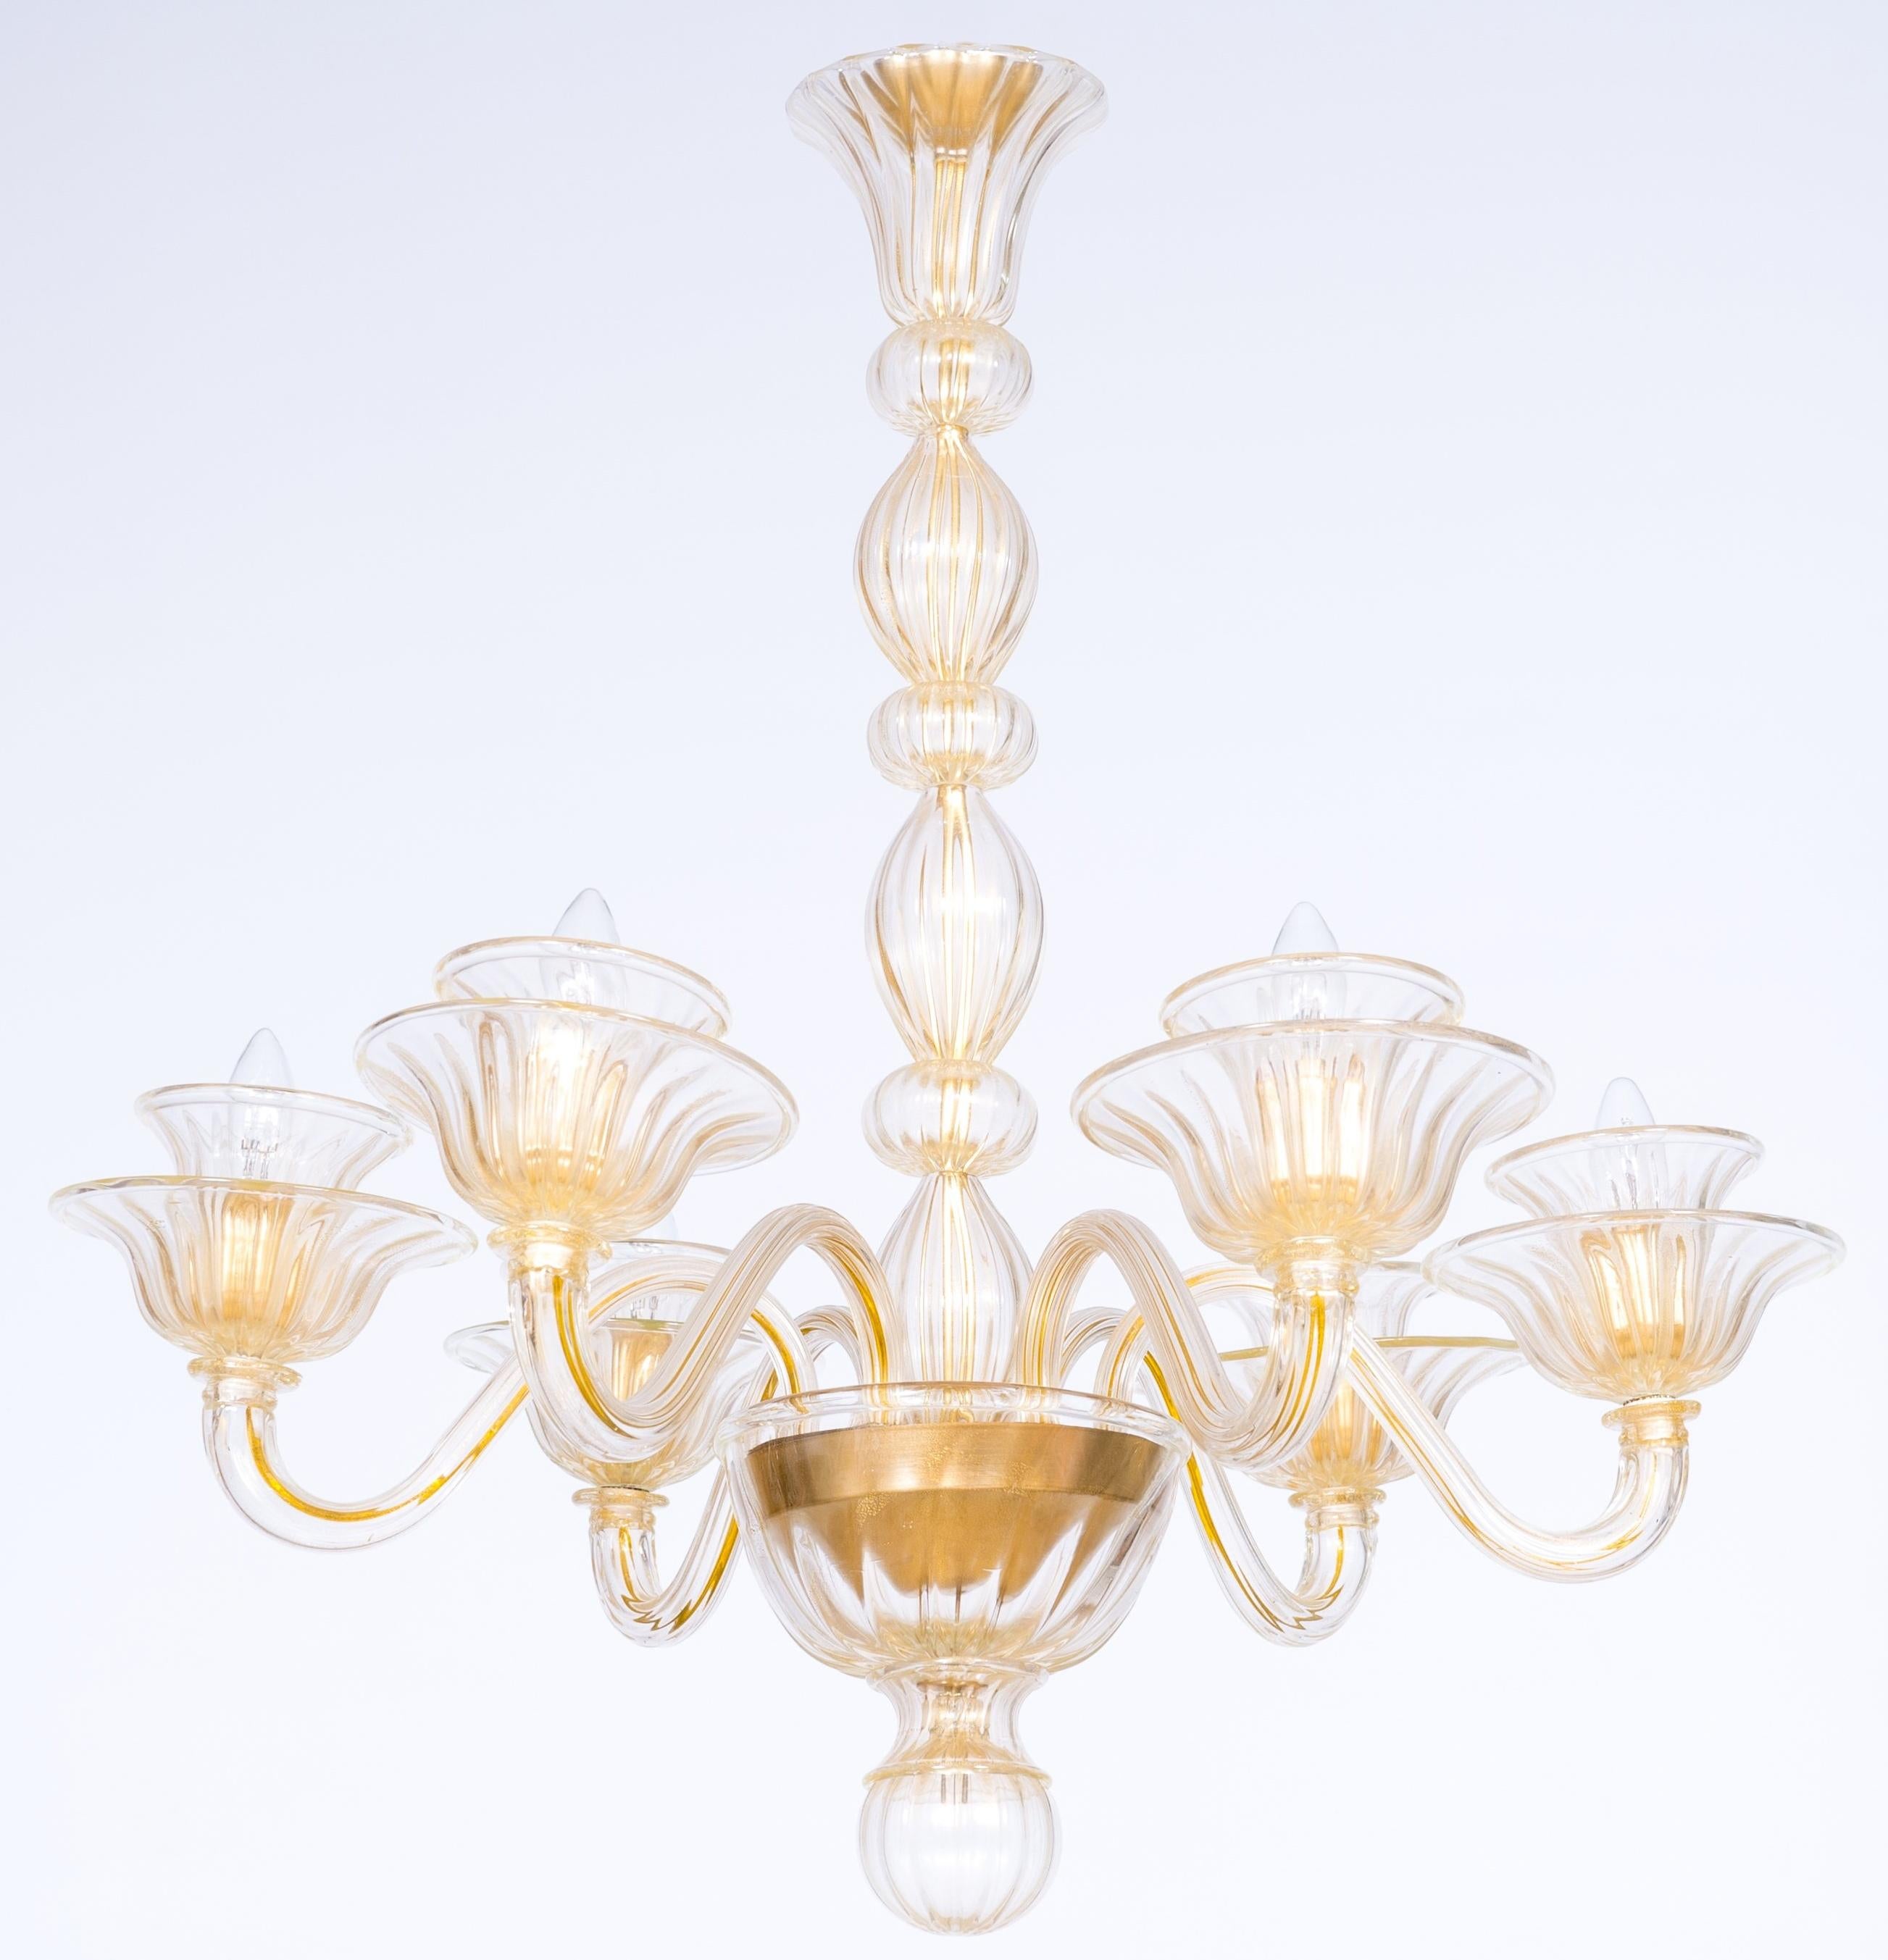 Refined Gold Spheres and round shaped Murano Glass Chandelier Contemporary Italy.
A Stunning and Elegant Venetian Murano Glass Chandelier with Gold Spheres and Olives, Handmade in Blown Murano Glass, 21st Century Italy.
This exquisite chandelier,